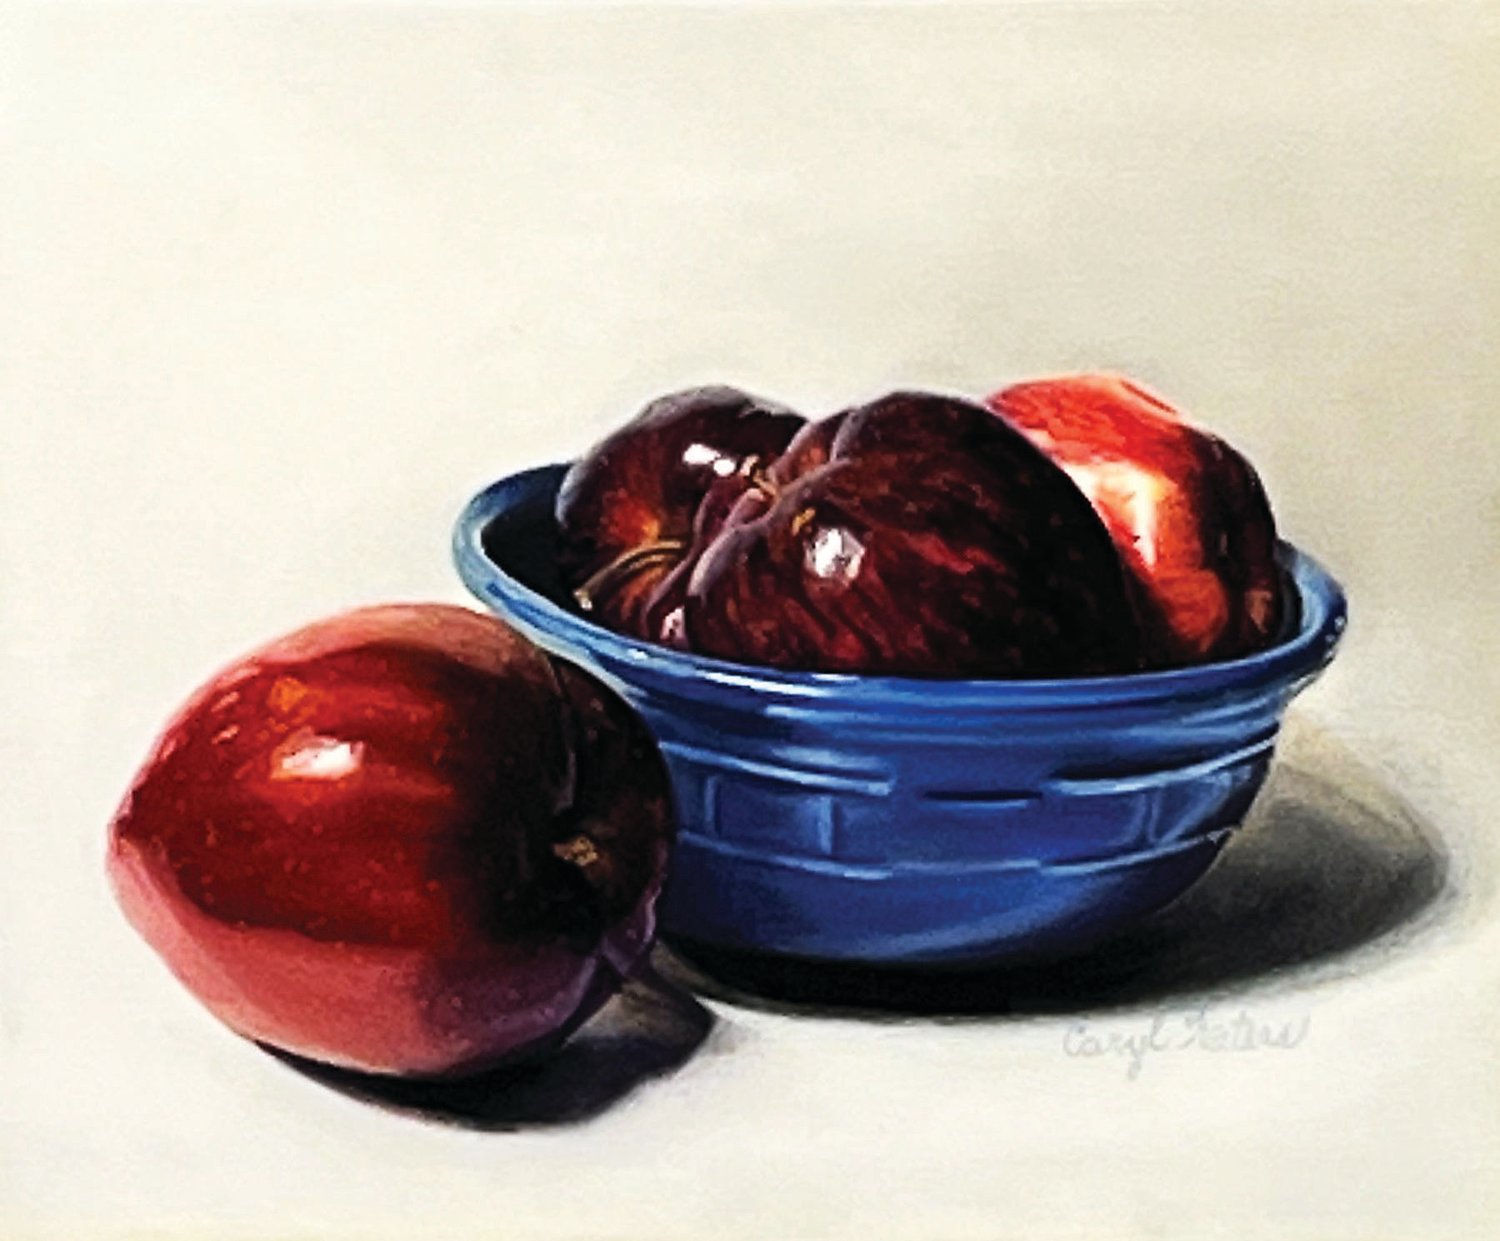 “An Apple a Day” is a pastel by Caryl Waters, a student in the Pastels class with Jacqueline Meyerson.